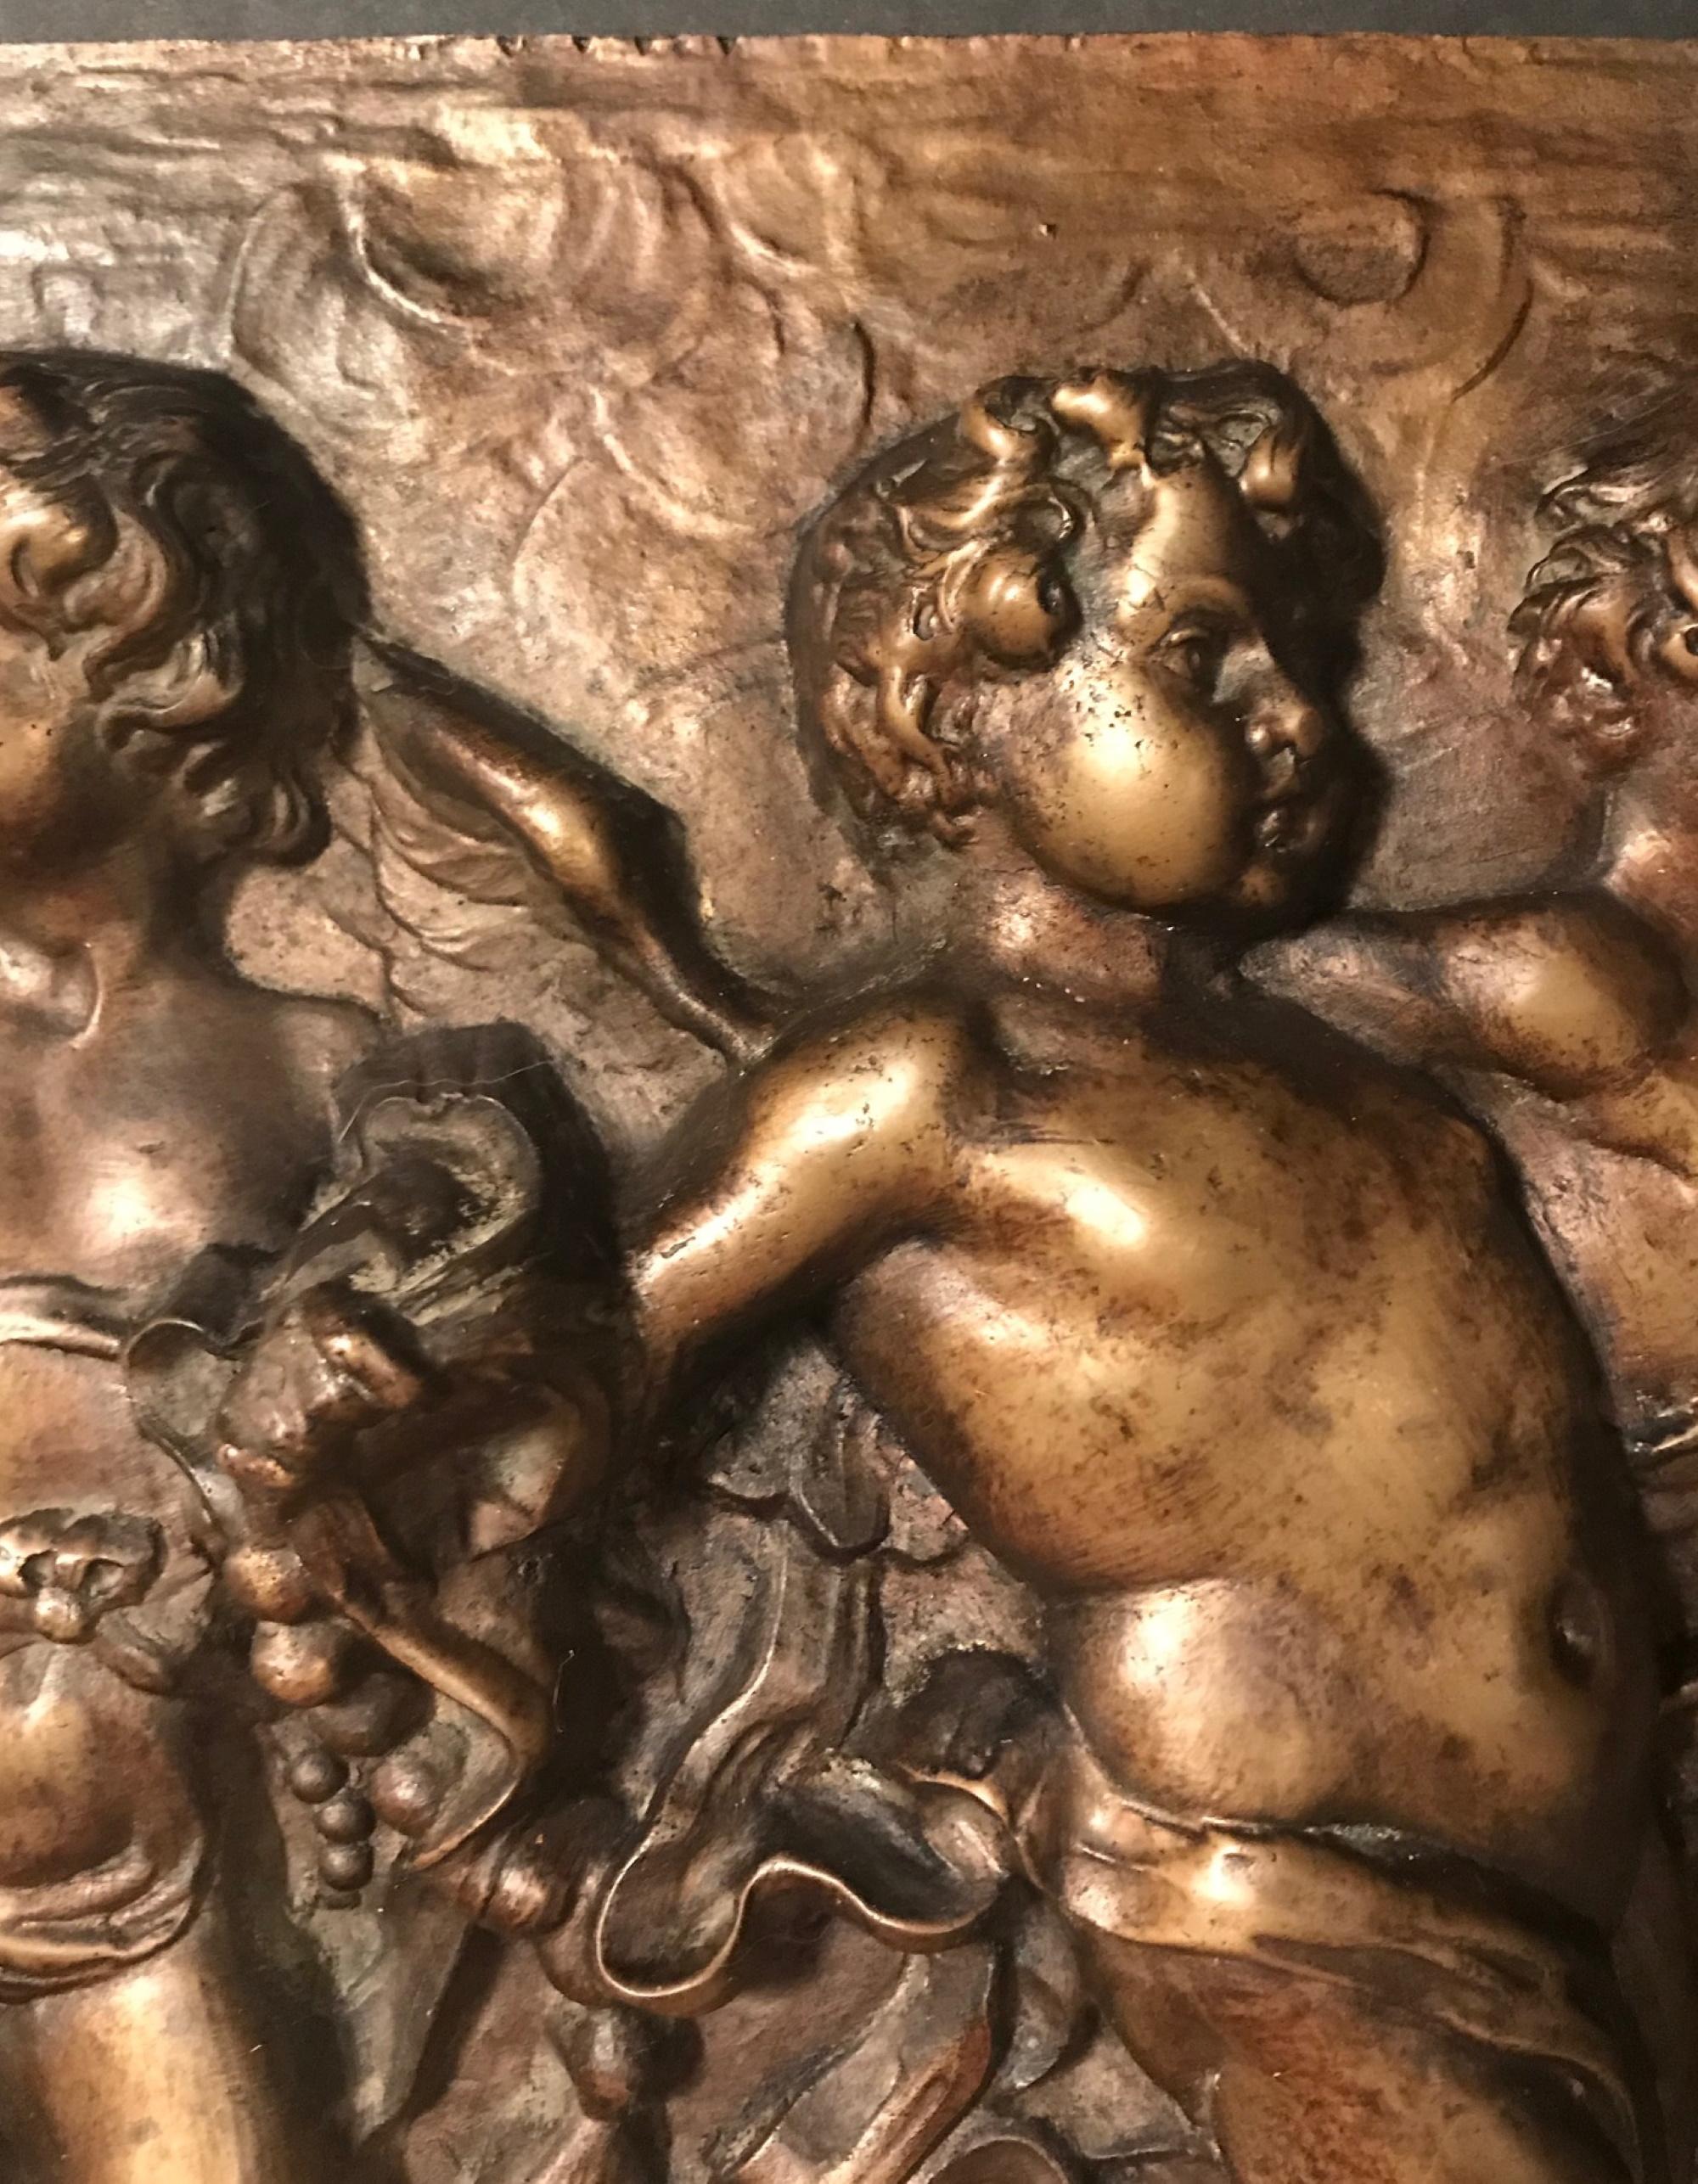 19th century heavy French bronze relief plaque of 3 dancing putti with tambourines.

This heavy and beautiful 19th century French bronze plaque features three charming dancing putti with tambourines. The movement of the limbs and clothes gives the